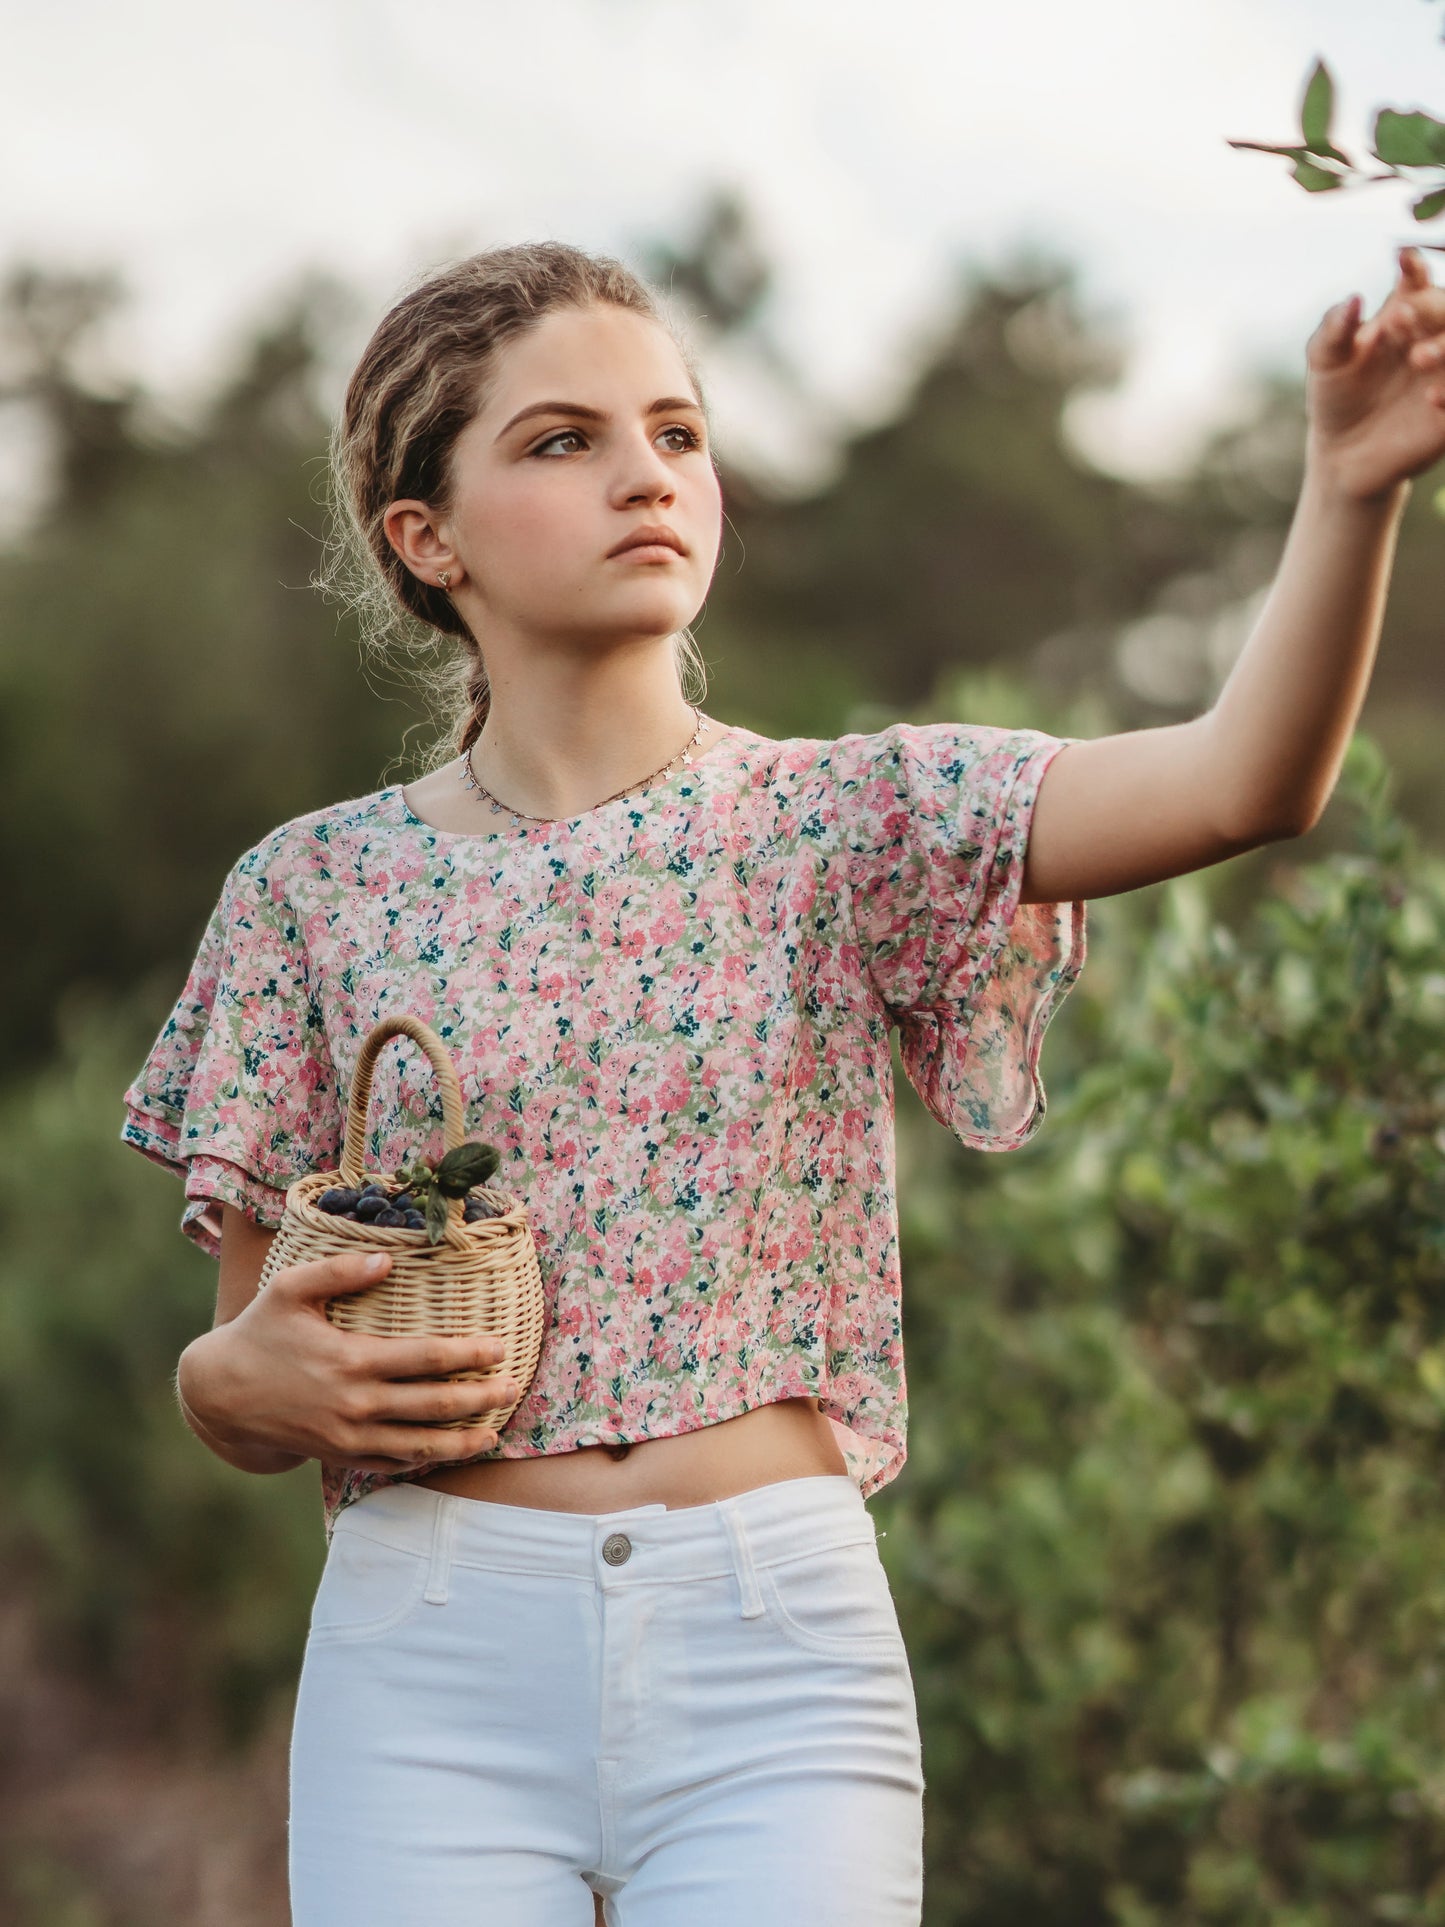 This image of a young woman features the product Classic Flutter Top - Joyful. This top has a keyhole back and flowy double ruffle sleeves. It is a pink and green floral pattern.